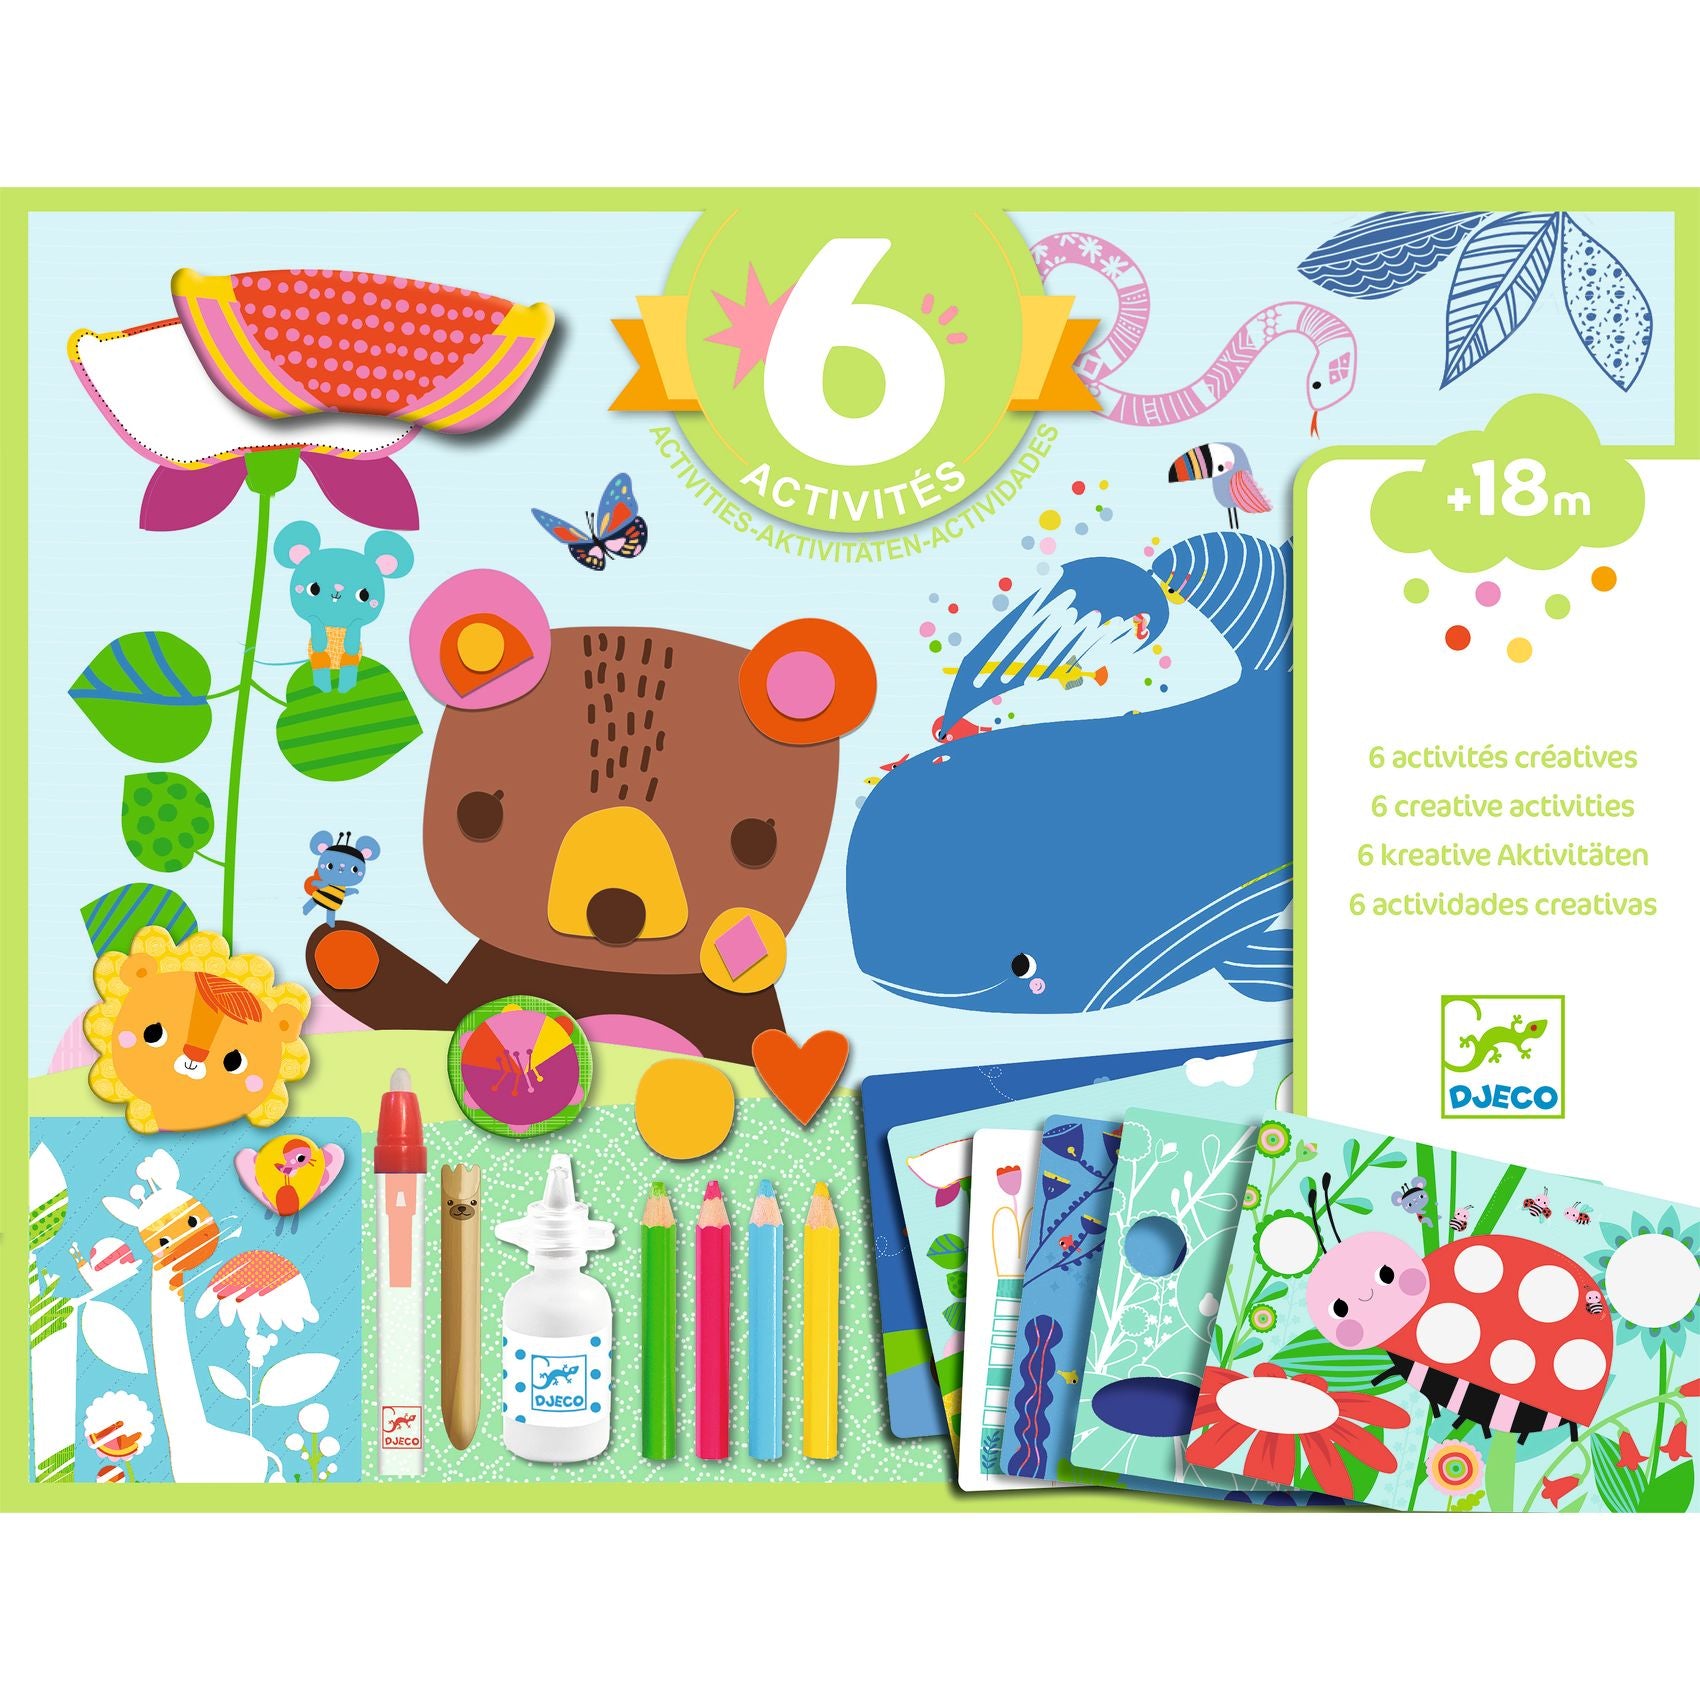 Djeco Multi-activity Kit - The mouse and his friends 18 mths +